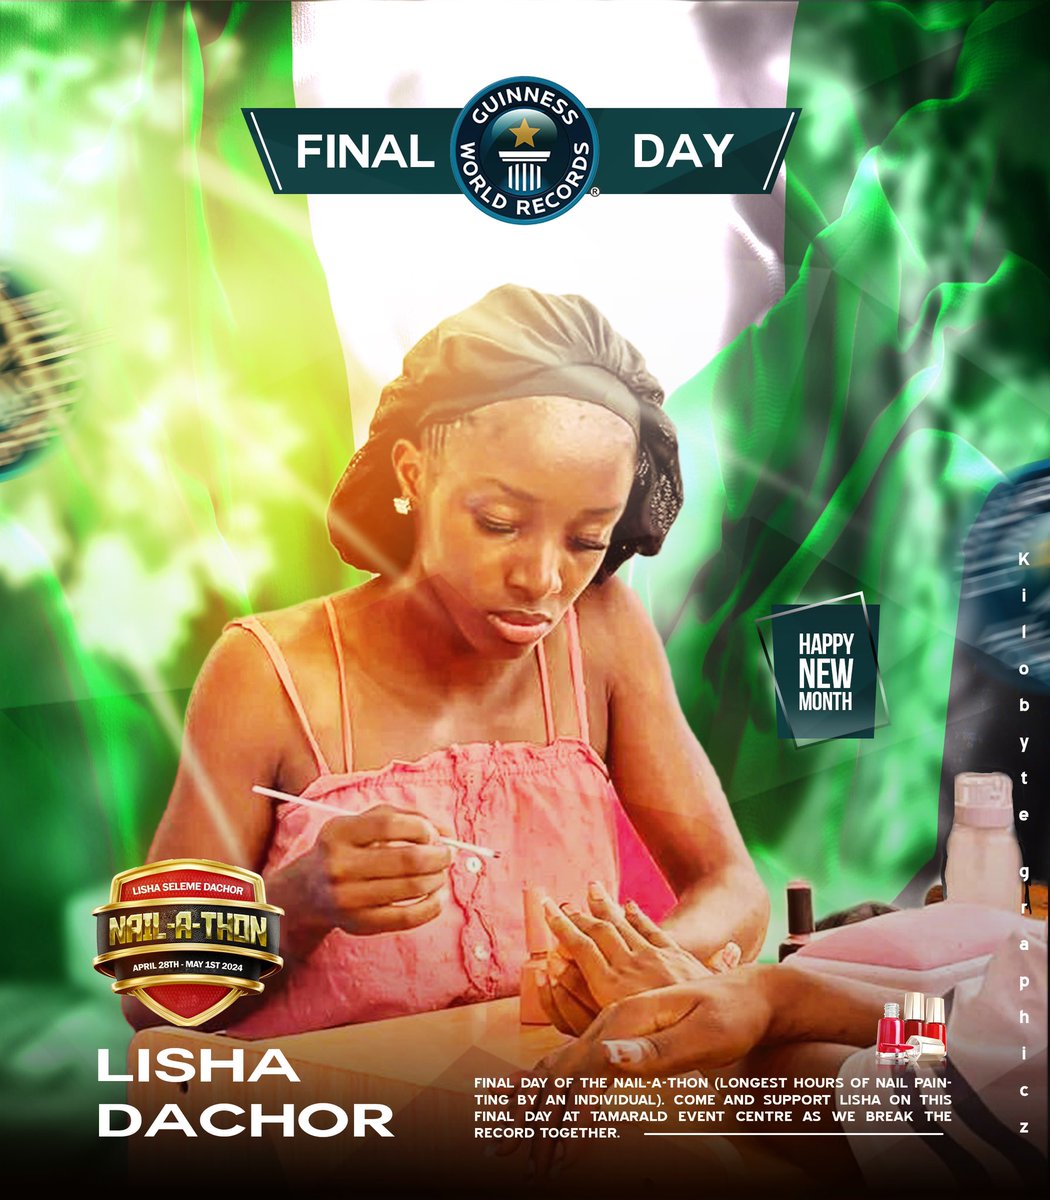 Support Lisha today.Follow, post, repost, like, and comment on anything with Lisha. Your presence would also be very important. Happy New Month with Lisha Dachor! #lishanailathon.